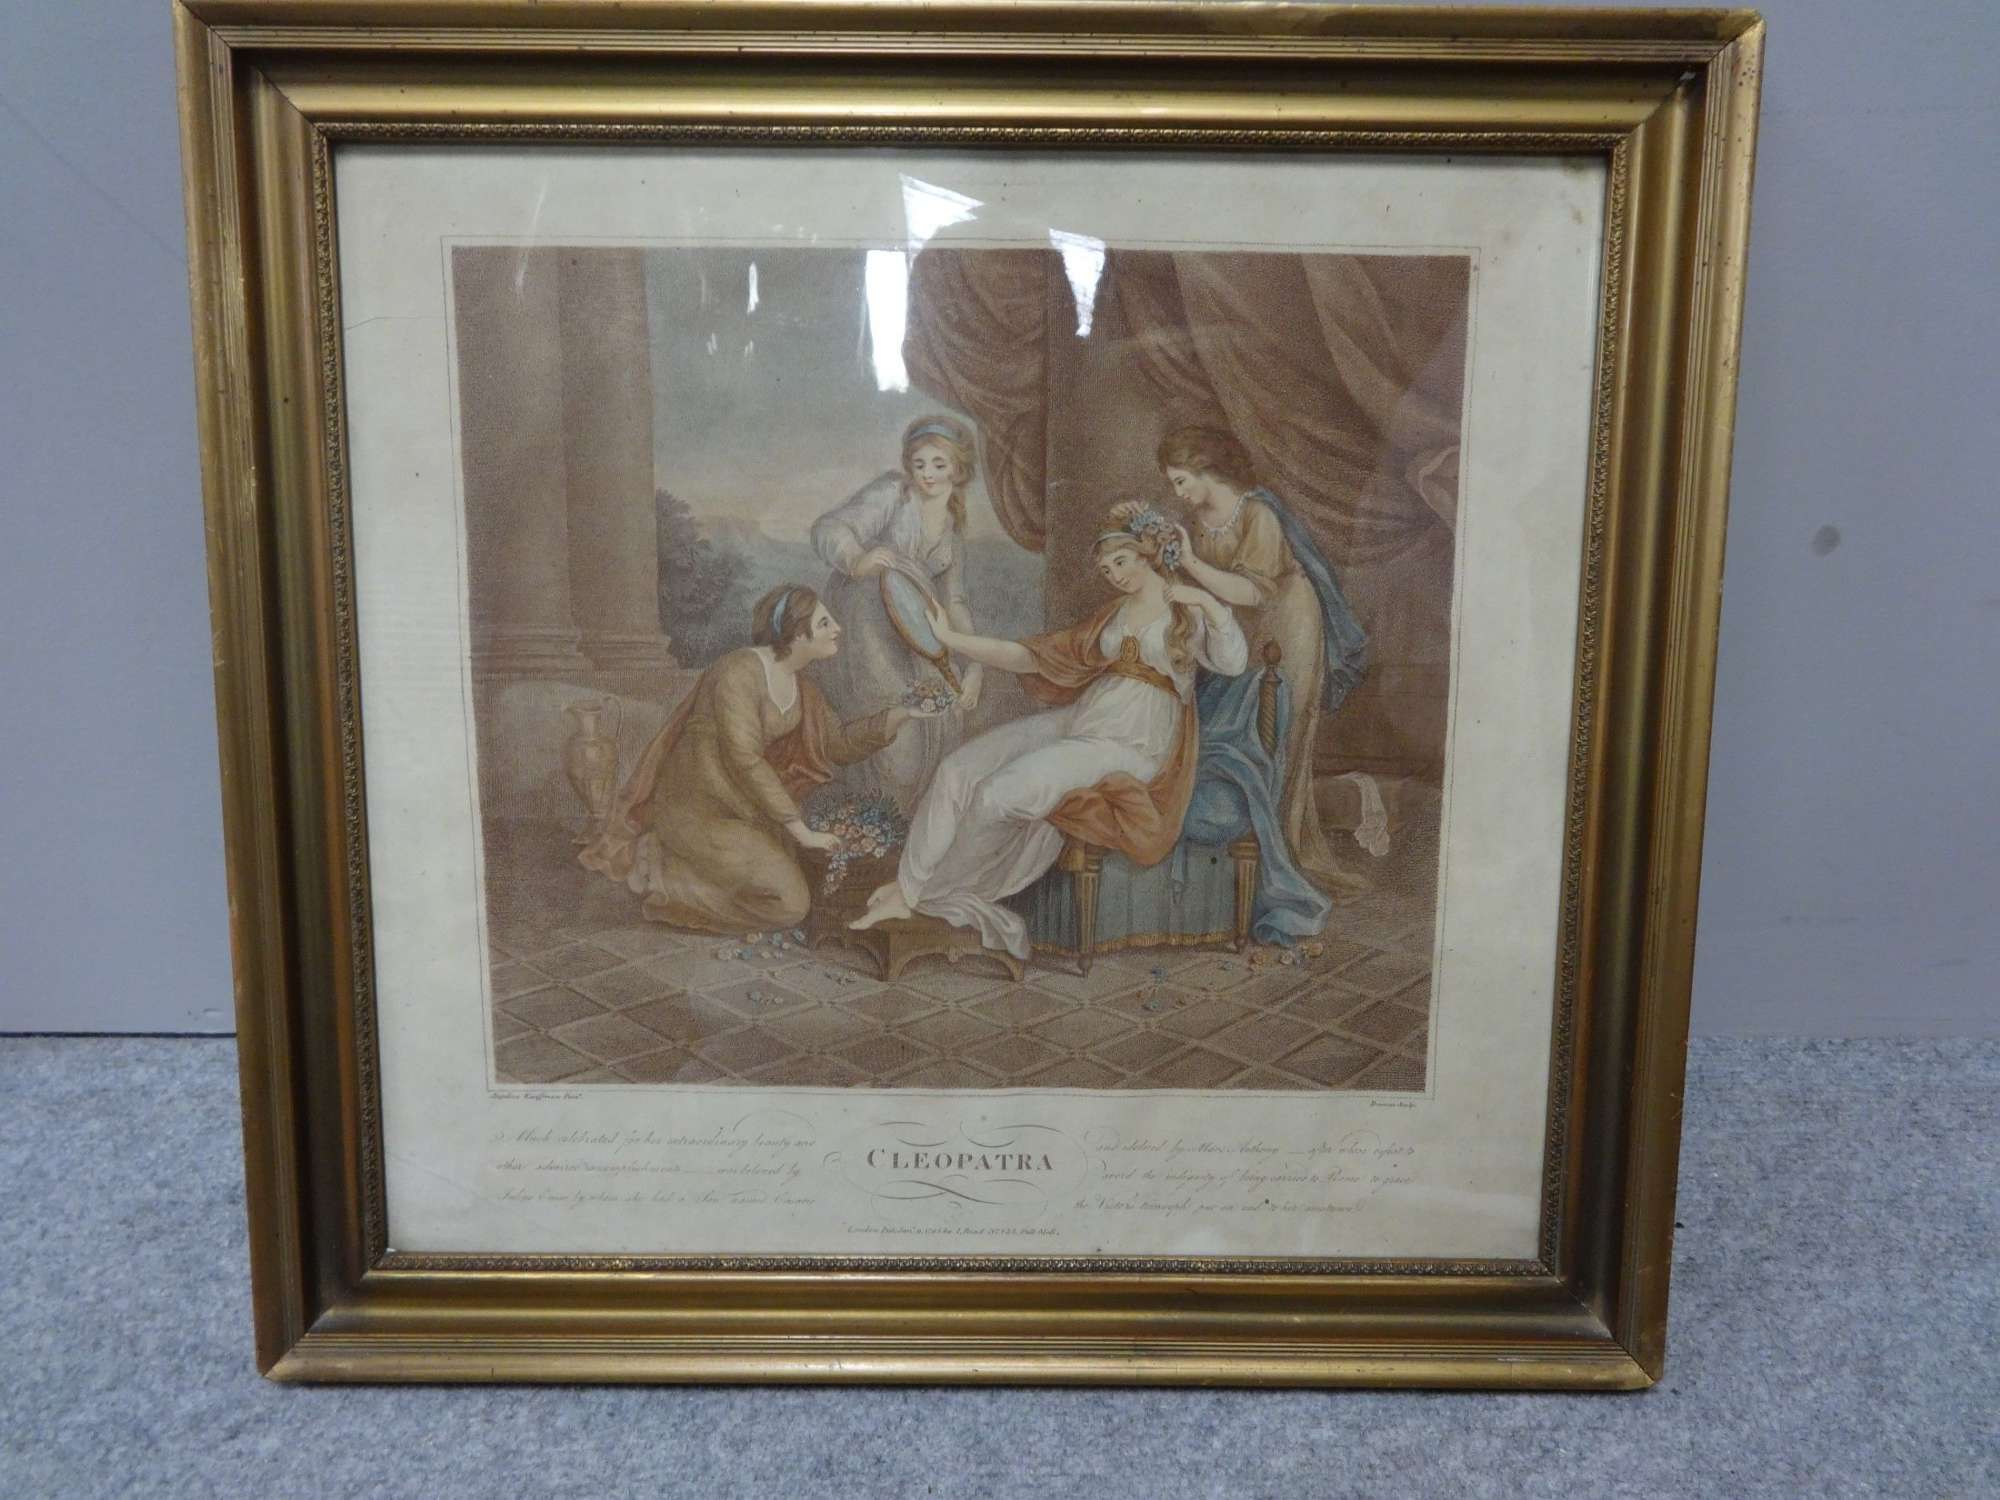 Regency Engraving 'cleopatra' By Angelica Kauffman